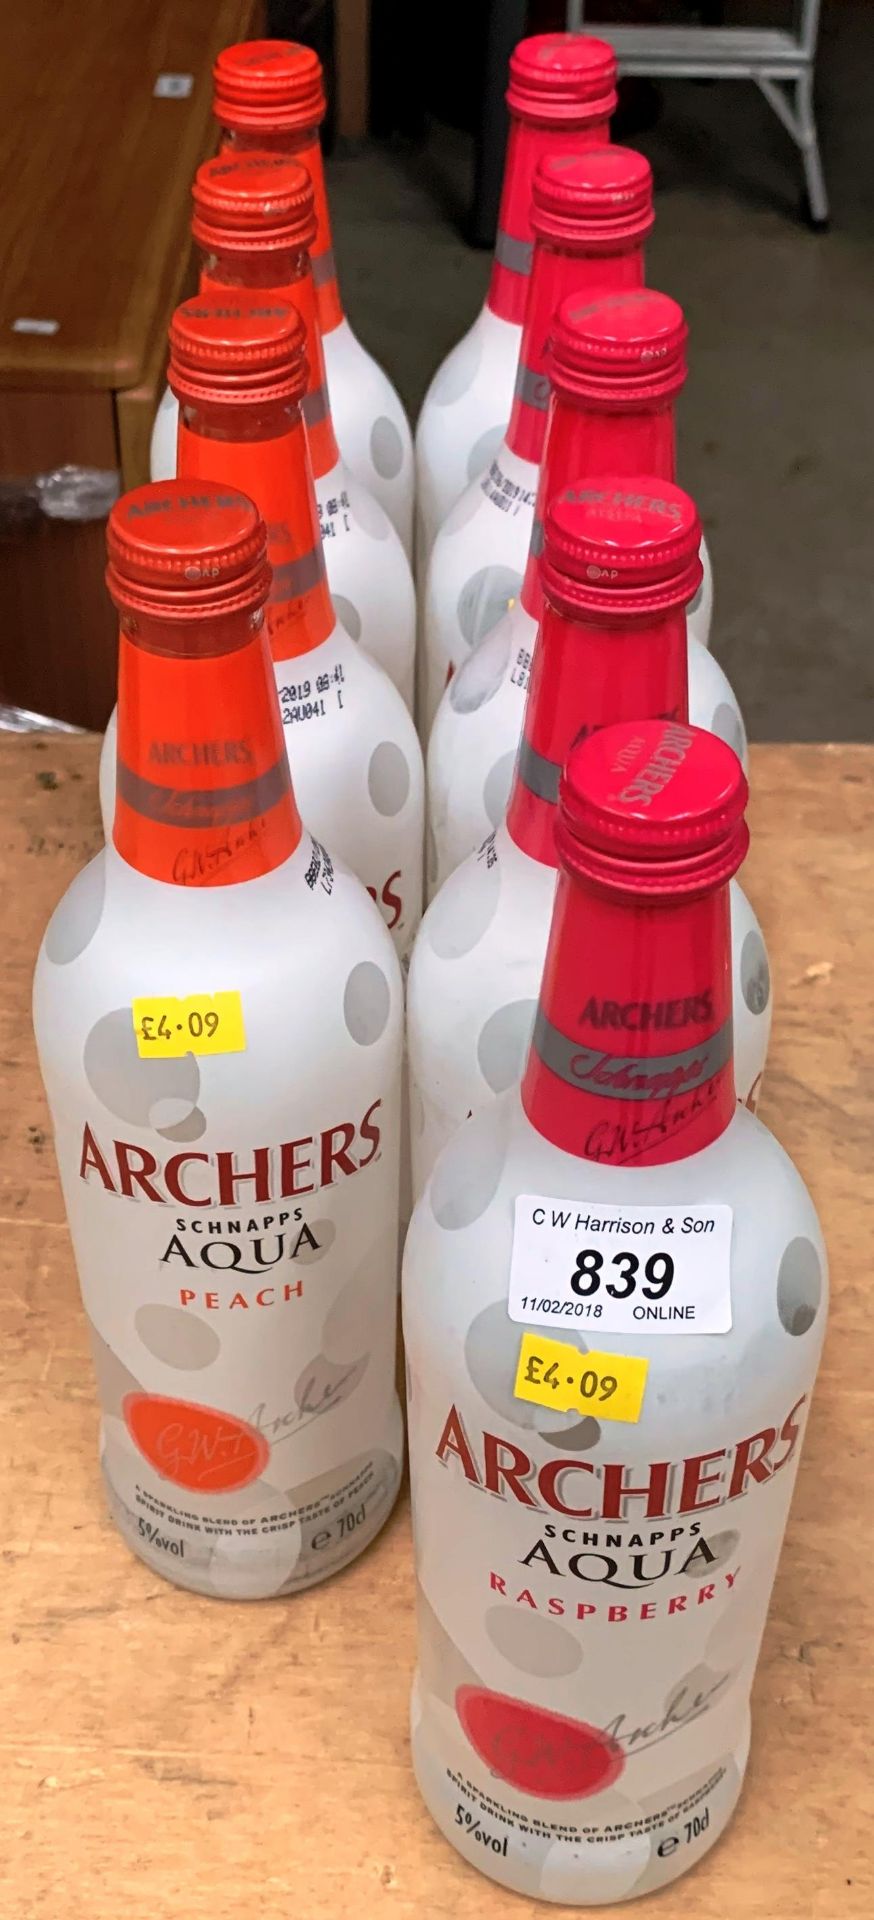 9 x 70cl bottles of Archers flavoured Schnapps - raspberry and peach